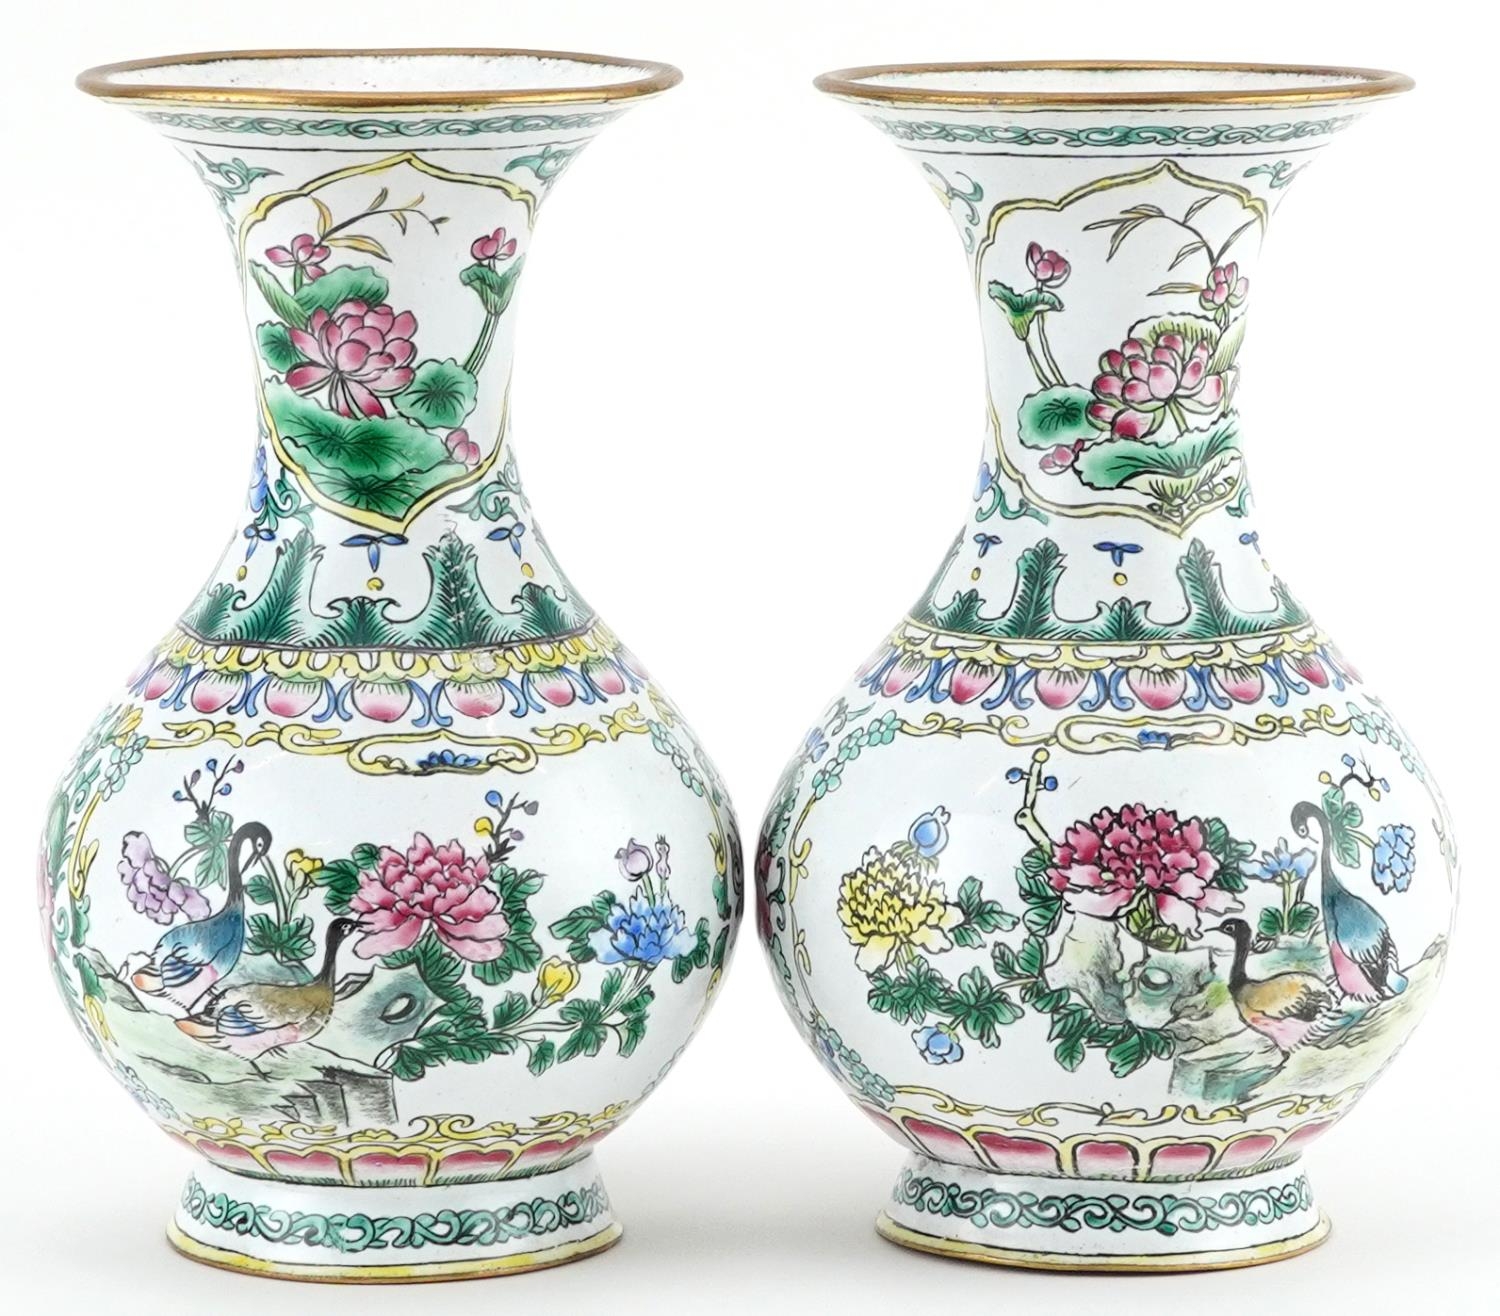 Pair of Chinese Canton enamelled vases hand painted with birds and ducks amongst flowers, each